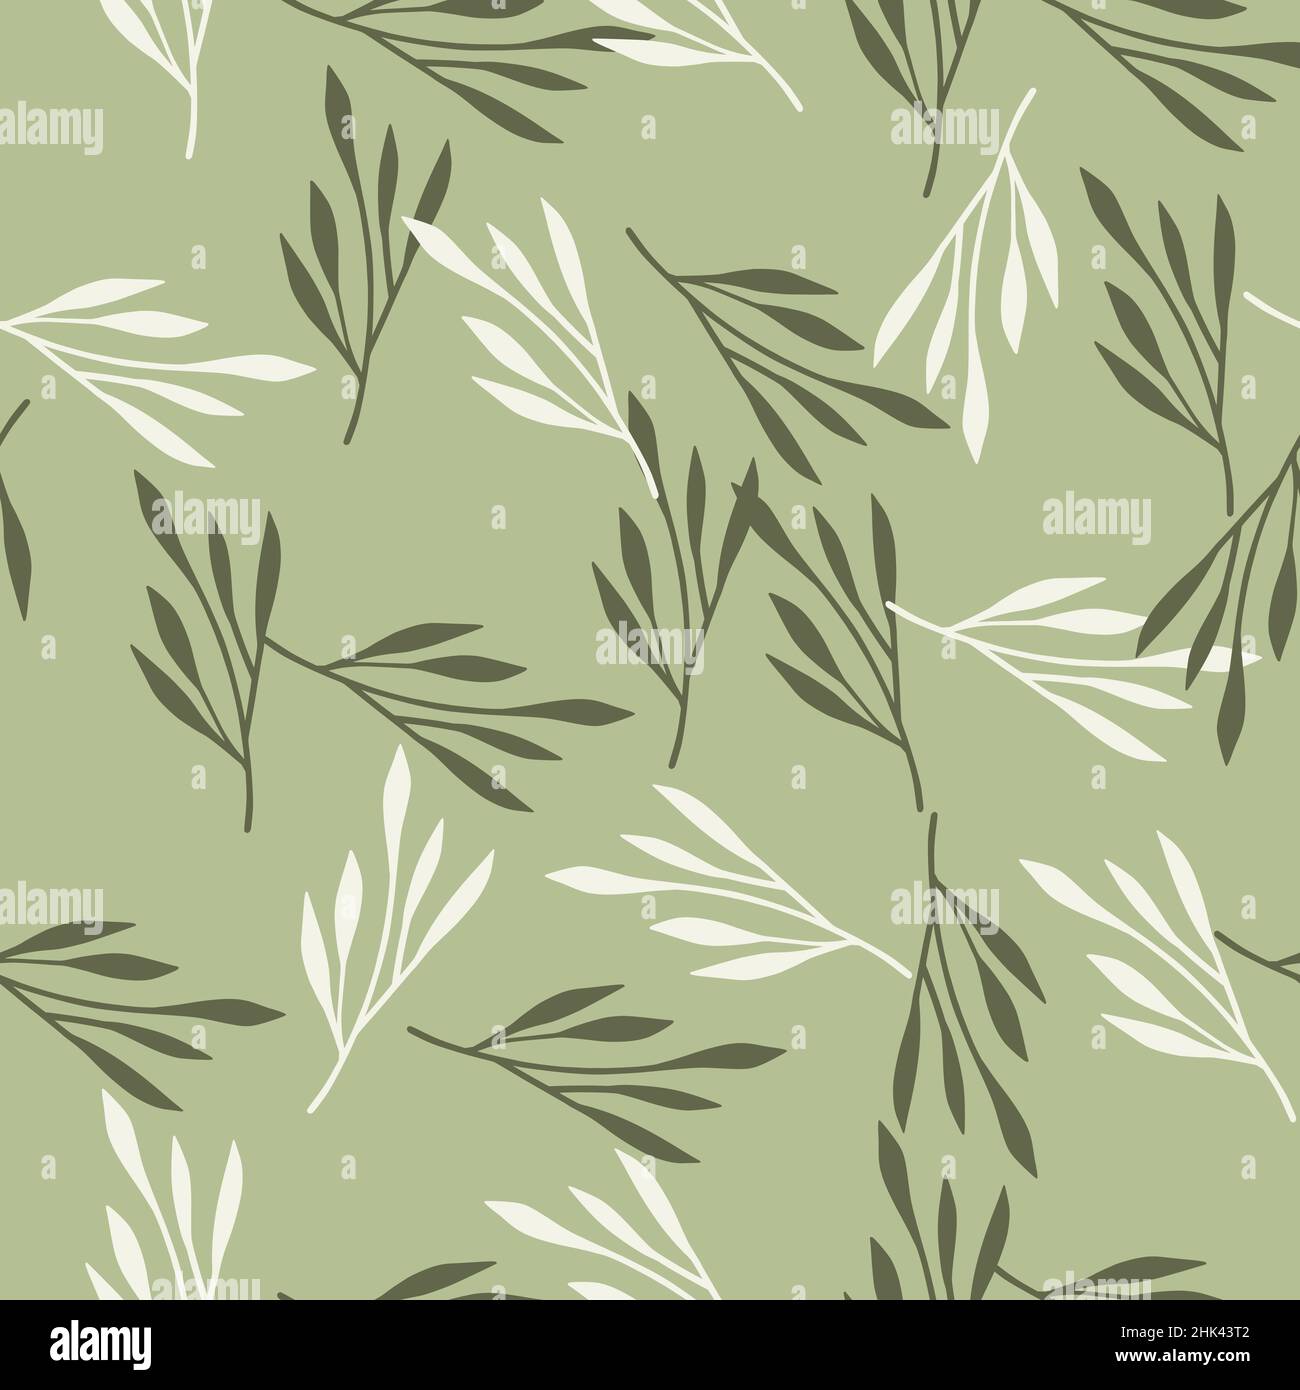 Spring season seamless pattern with random hand drawn leaf branches ornament. Light green background. Vector illustration for seasonal textile prints, Stock Vector